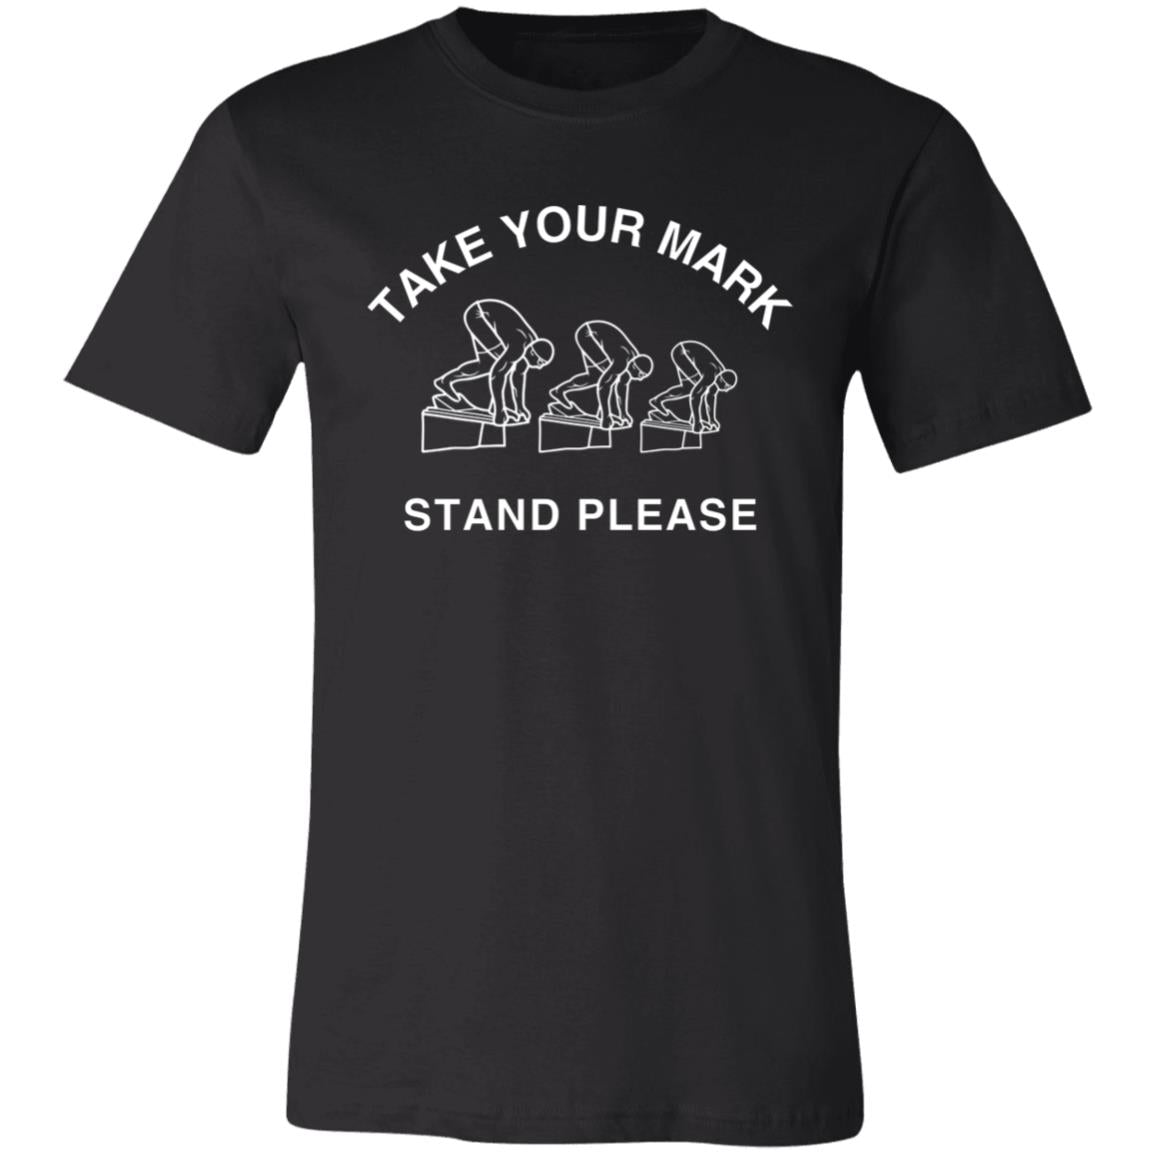 Take Your Mark... Stand Please Comfy T-Shirt